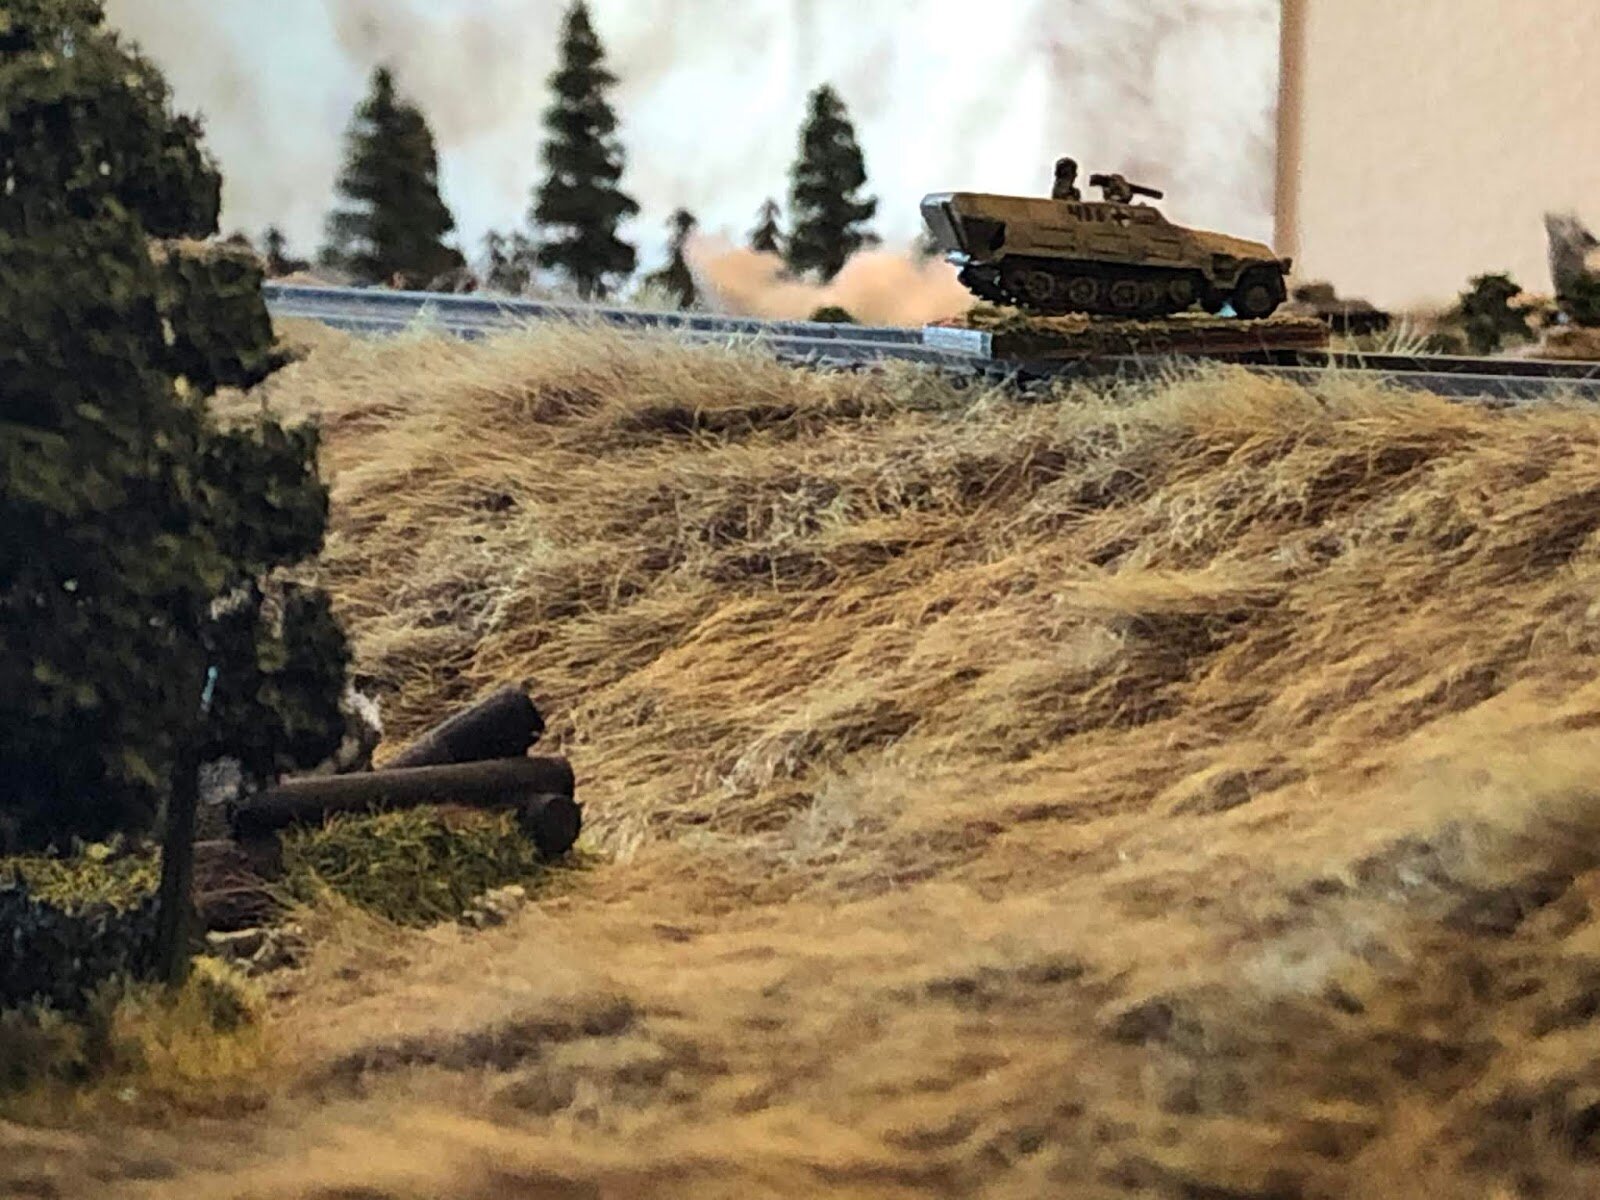  Having lost track of the Soviet infantry on the right (the Soviet 1st Rifle platoon remnants were just off camera to the right, last time he saw and fired on them), the German Halftrack Platoon Commander pushes his vehicle forward, cresting the rail